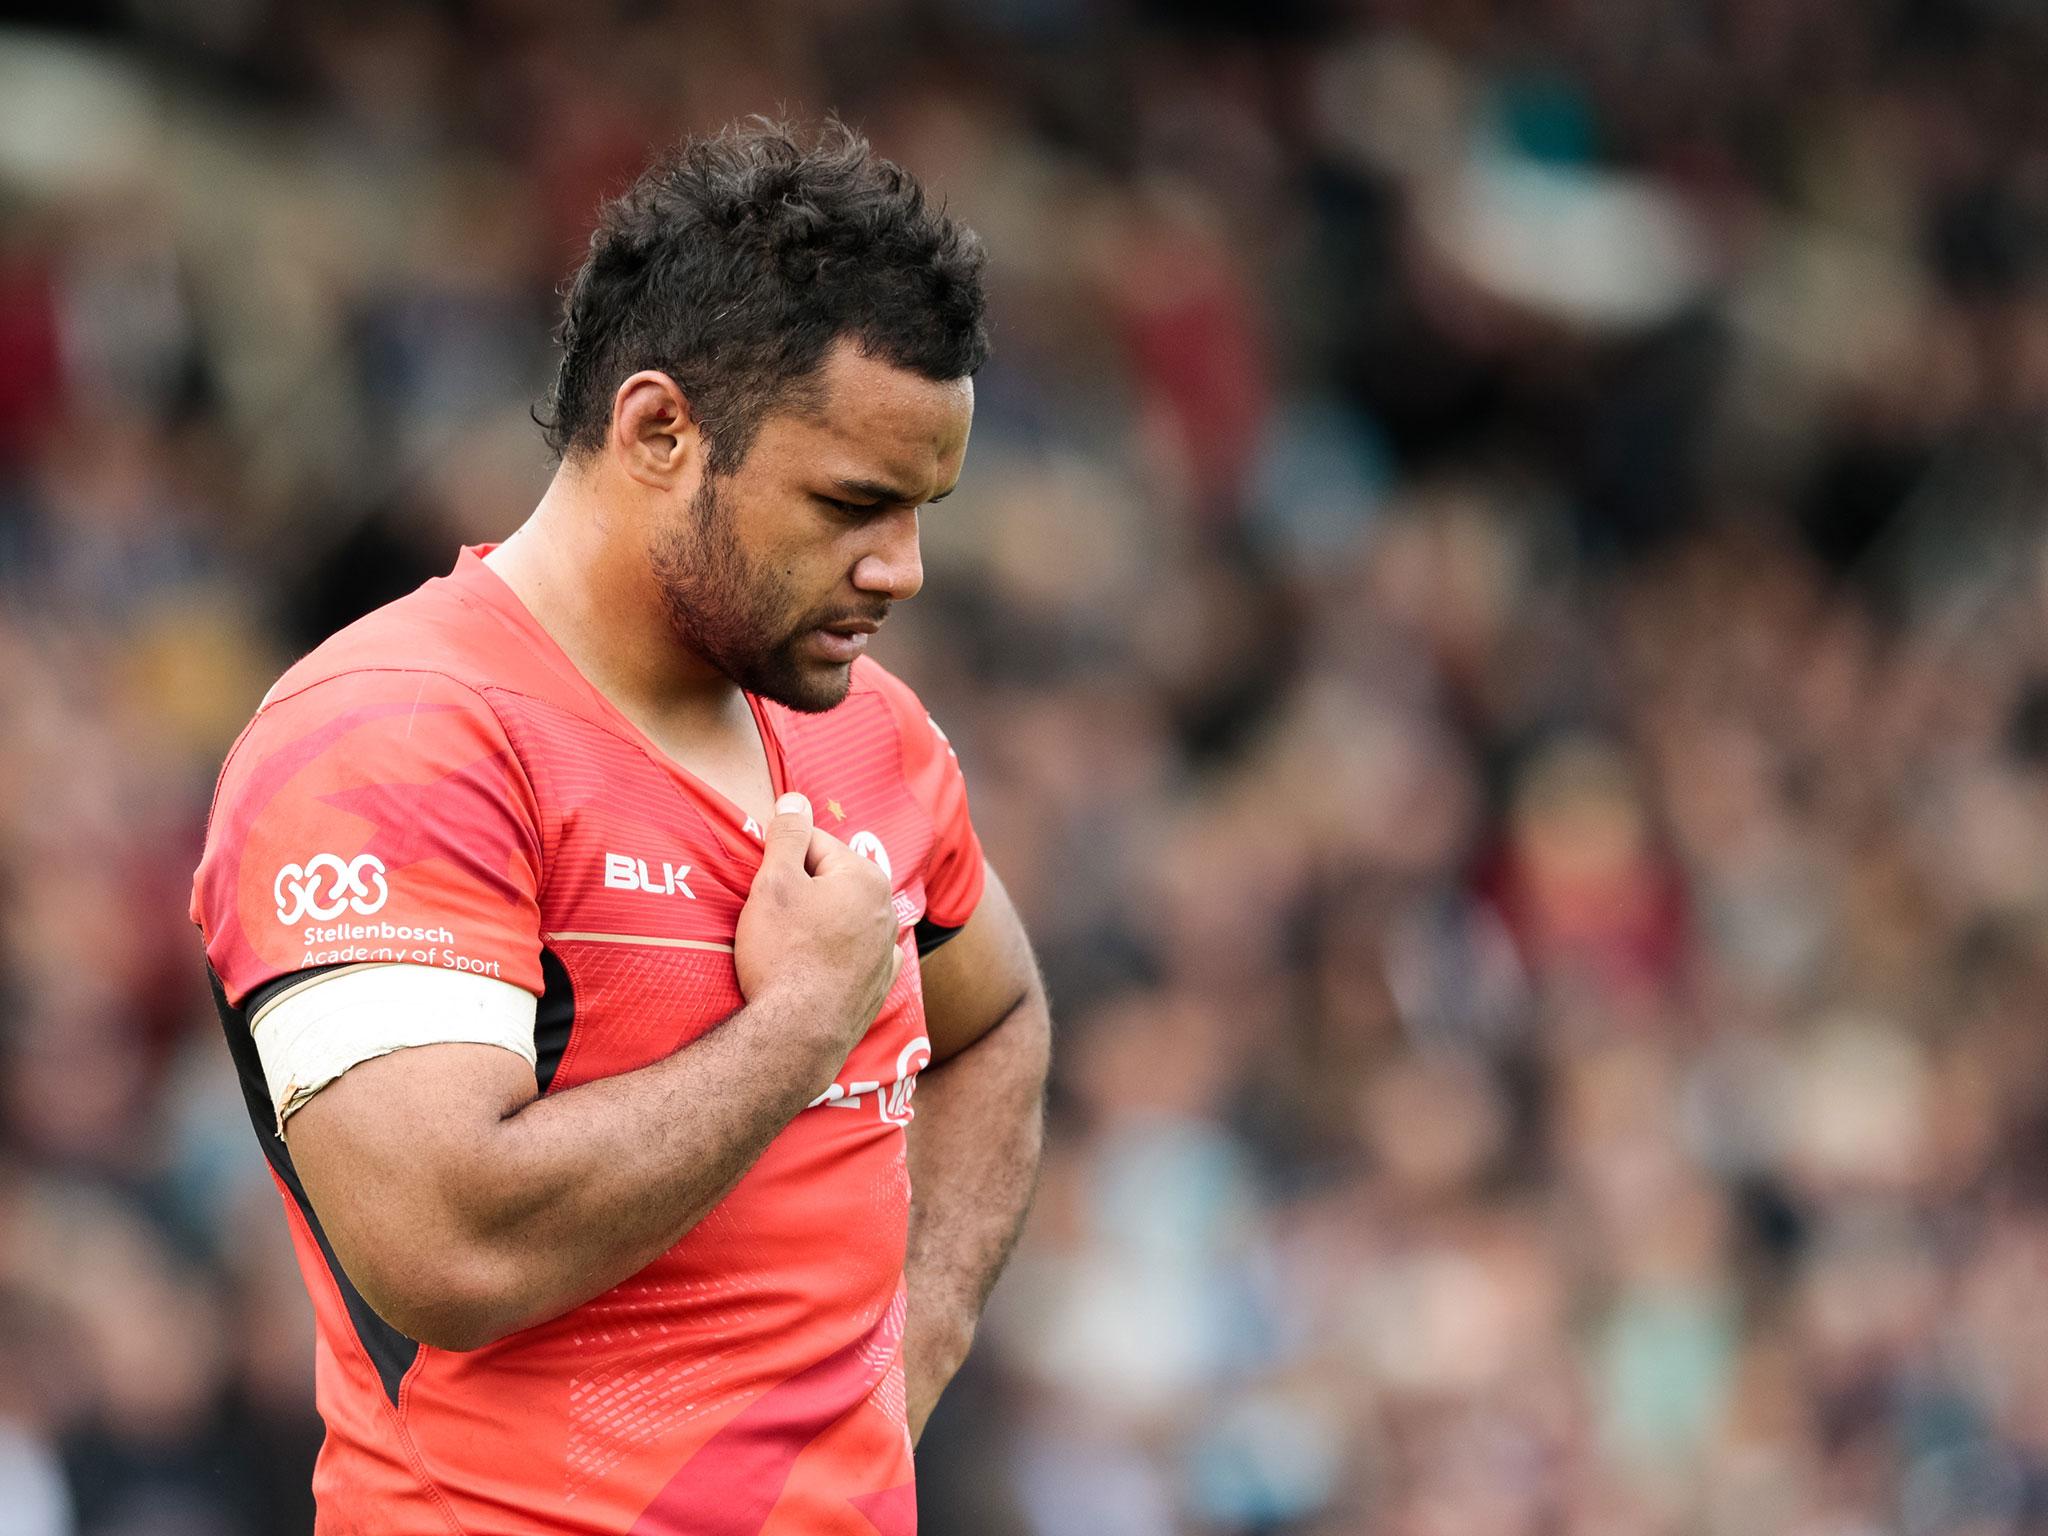 Vunipola makes his latest return to injury after a nightmare 20 months